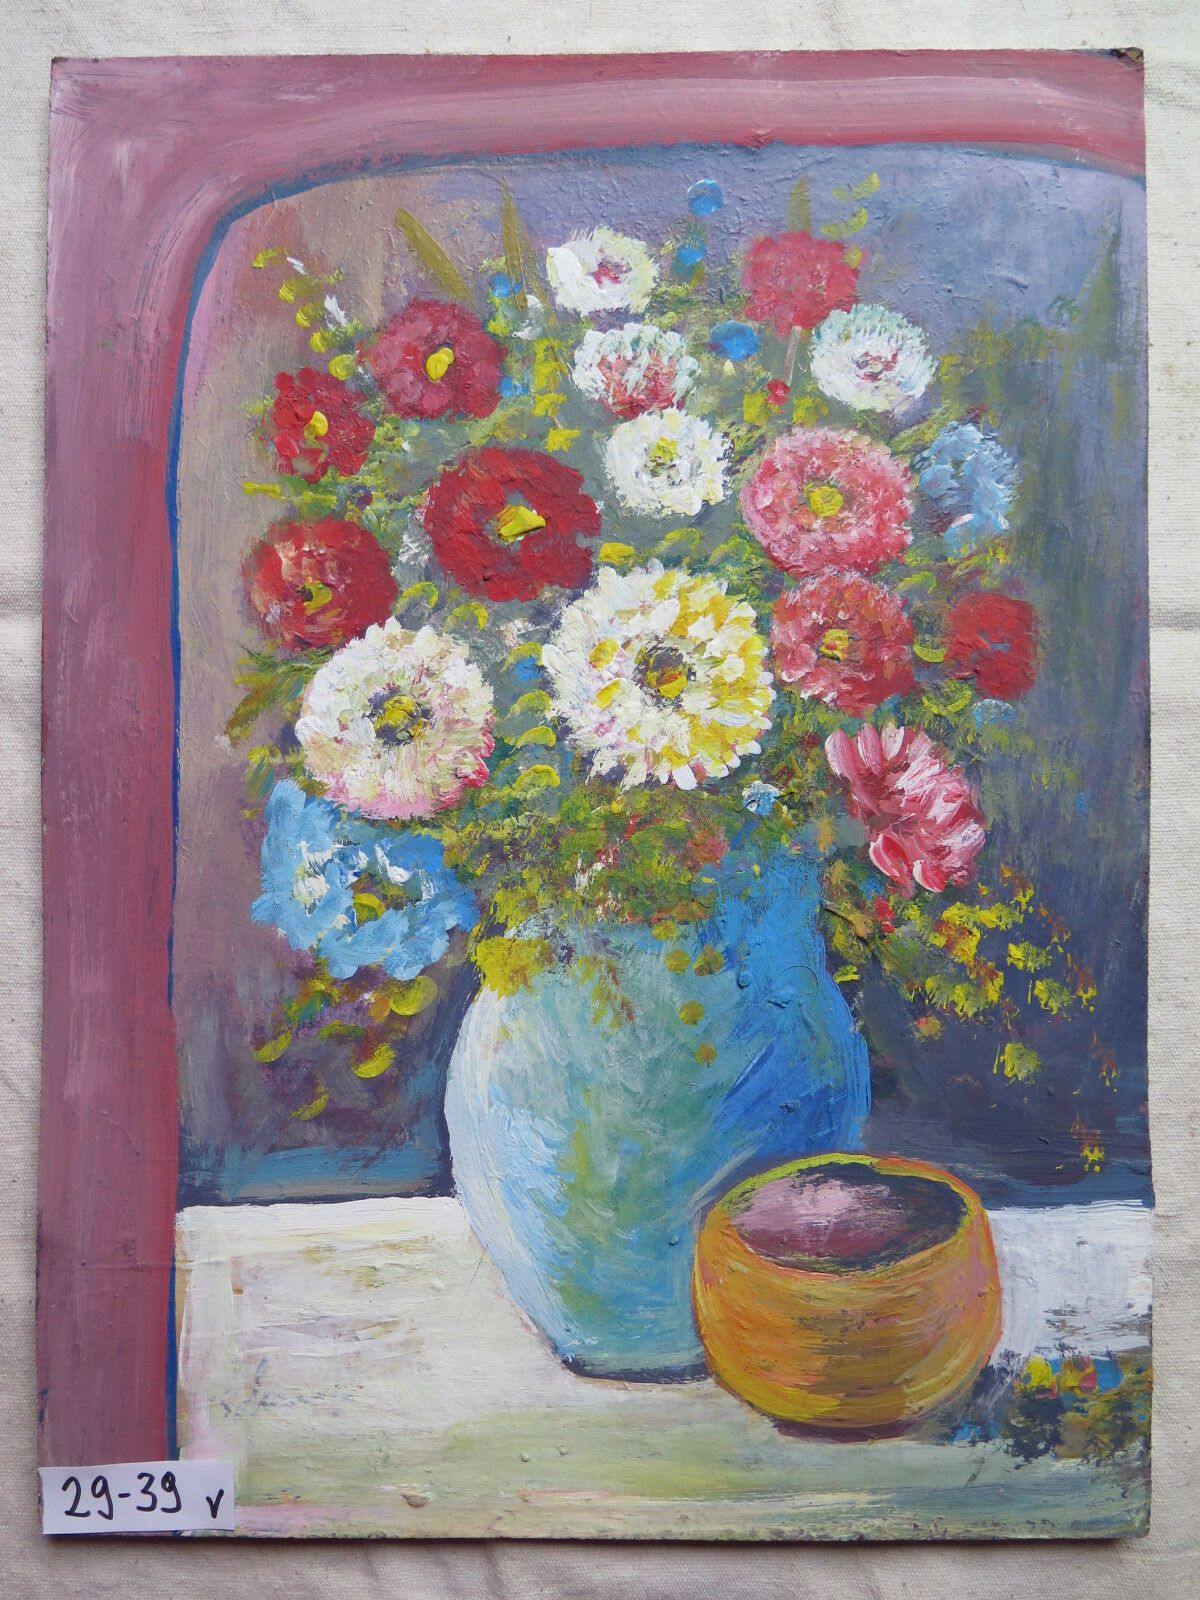 FLORAL PAINTING OIL PAINTED ON TABLE CIRCA 1950 SIGNED IMRPESSIONIST STYLE v